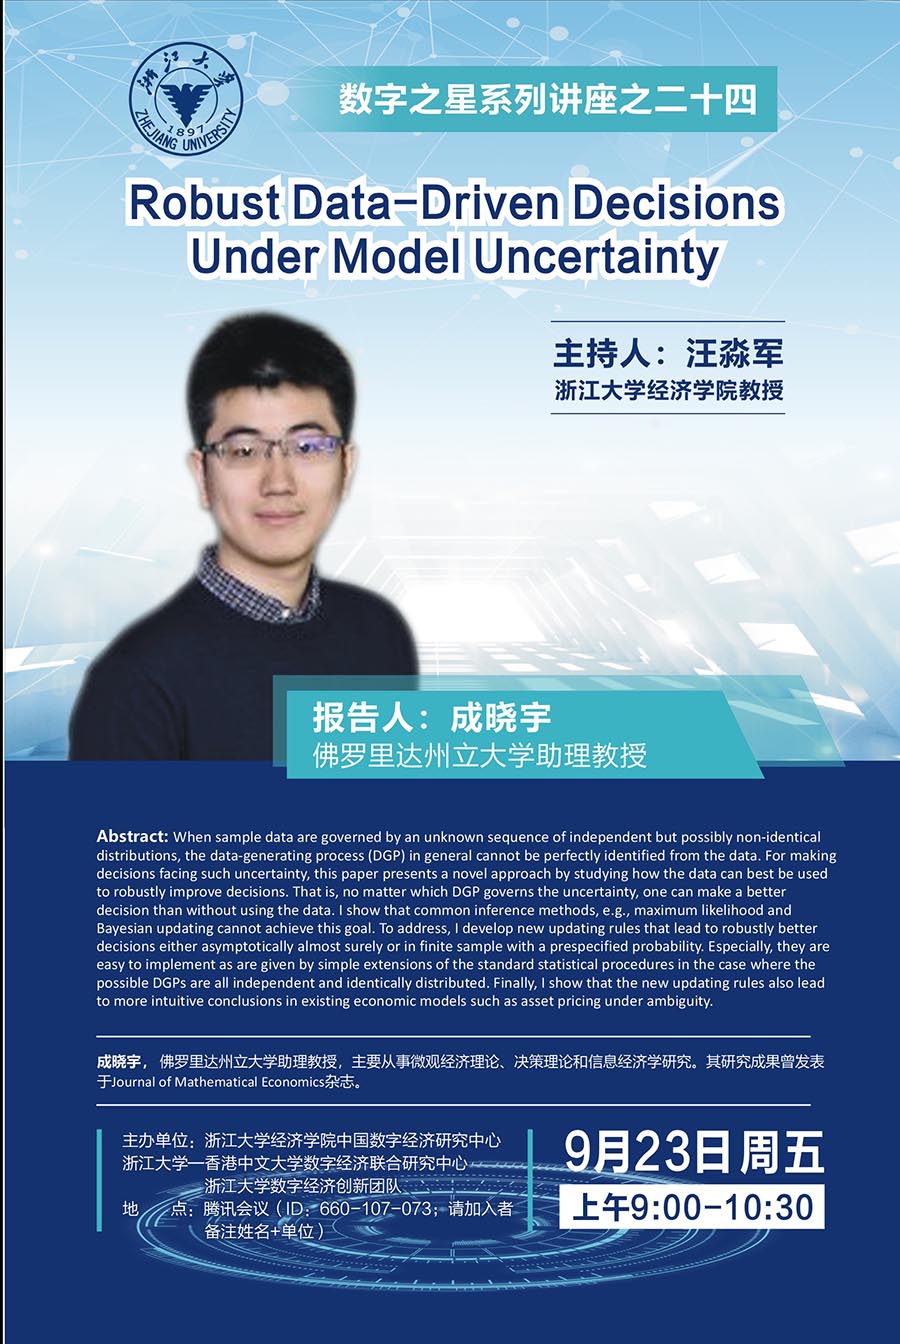 【 The Digital Star Seminar Series No.24 】Robust Data-Driven Decisions Under Model Uncertainty